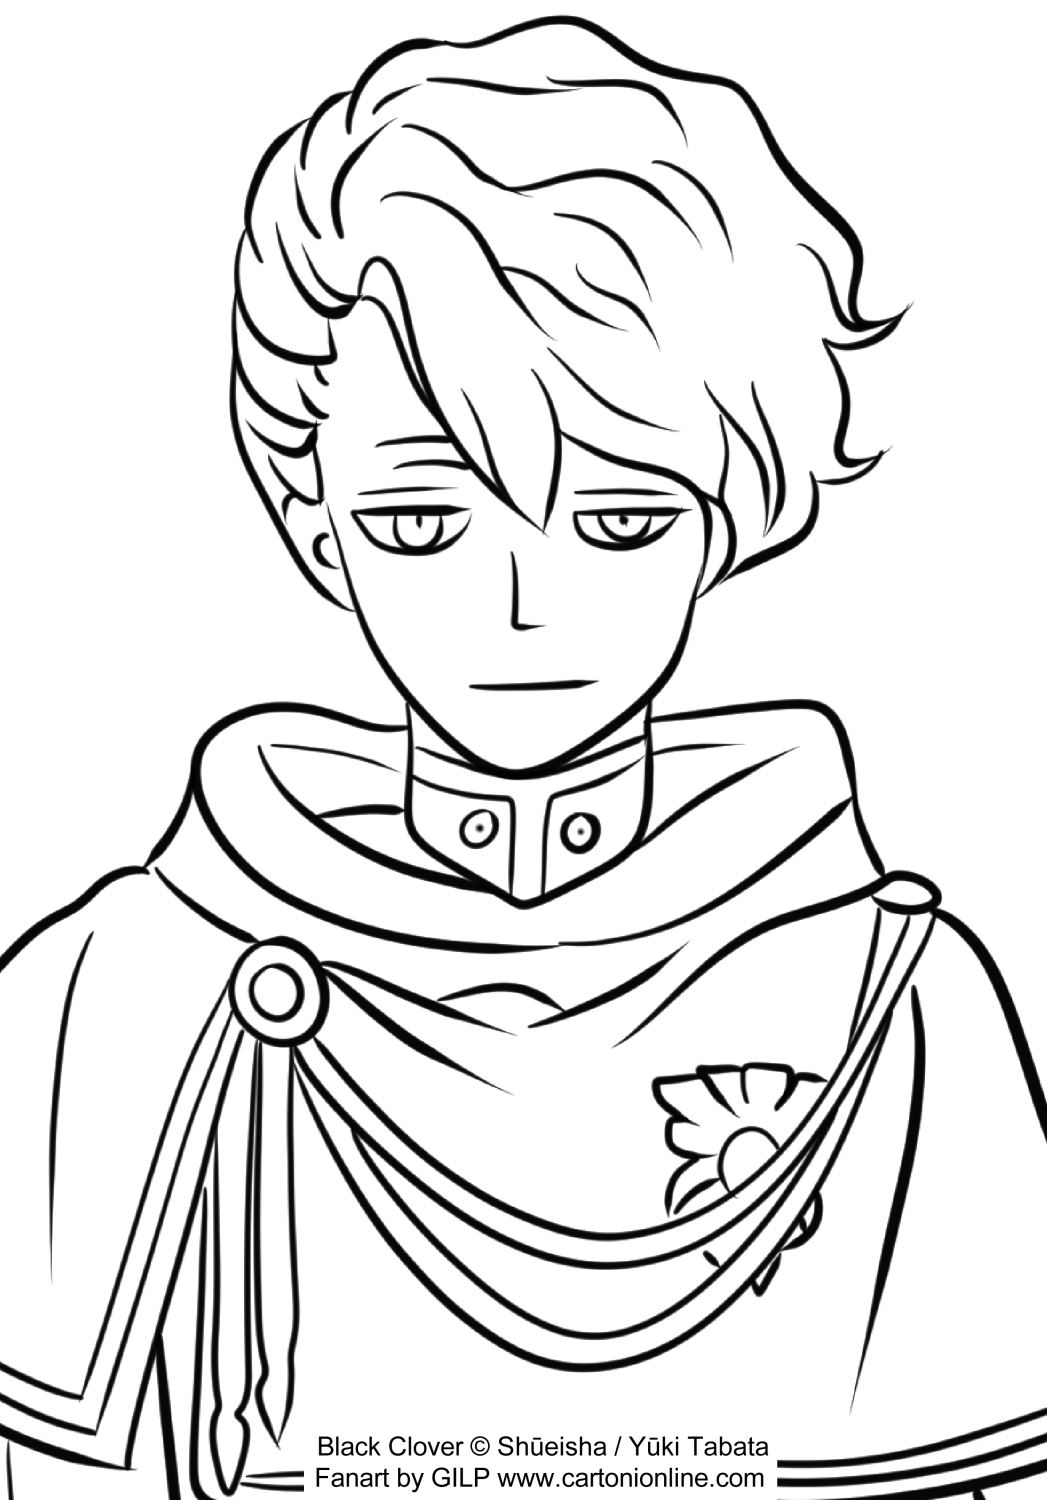 Langris Vaude Black Clover coloring page to print and coloring